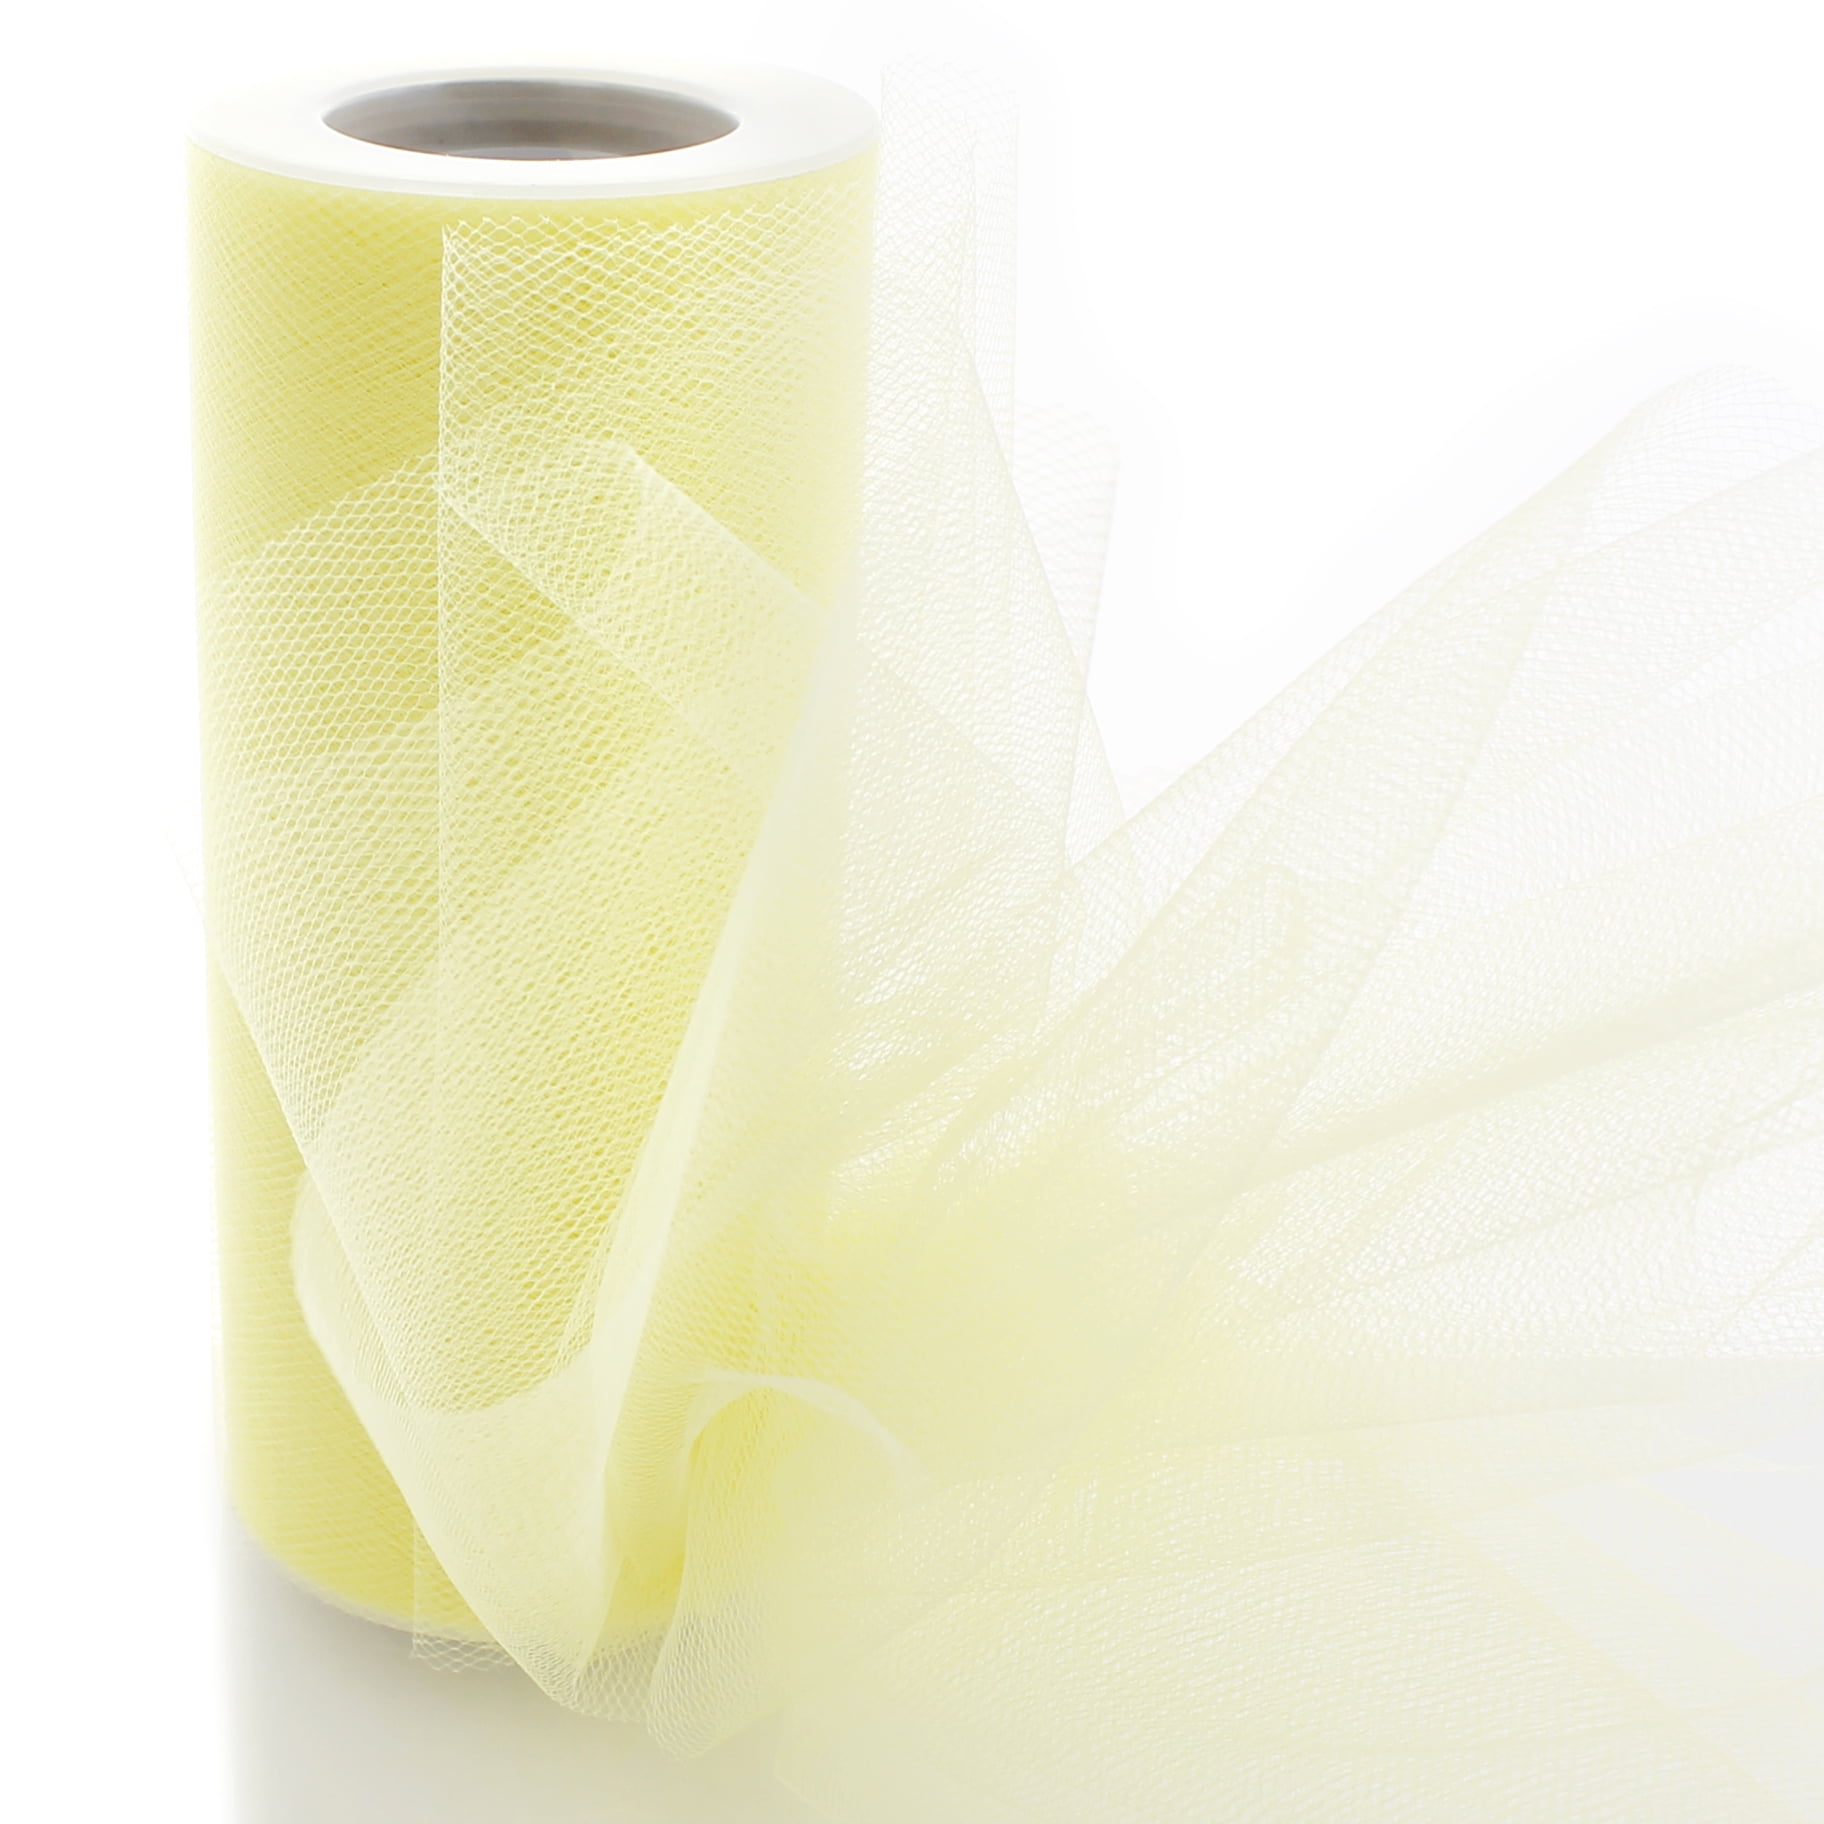 Incraftables Tulle Fabric 6 Colors Roll (25 Yards per Roll). Decor Tulle Ribbon for Gift Wrapping, Size: 25 yard/75 Feet Each Roll